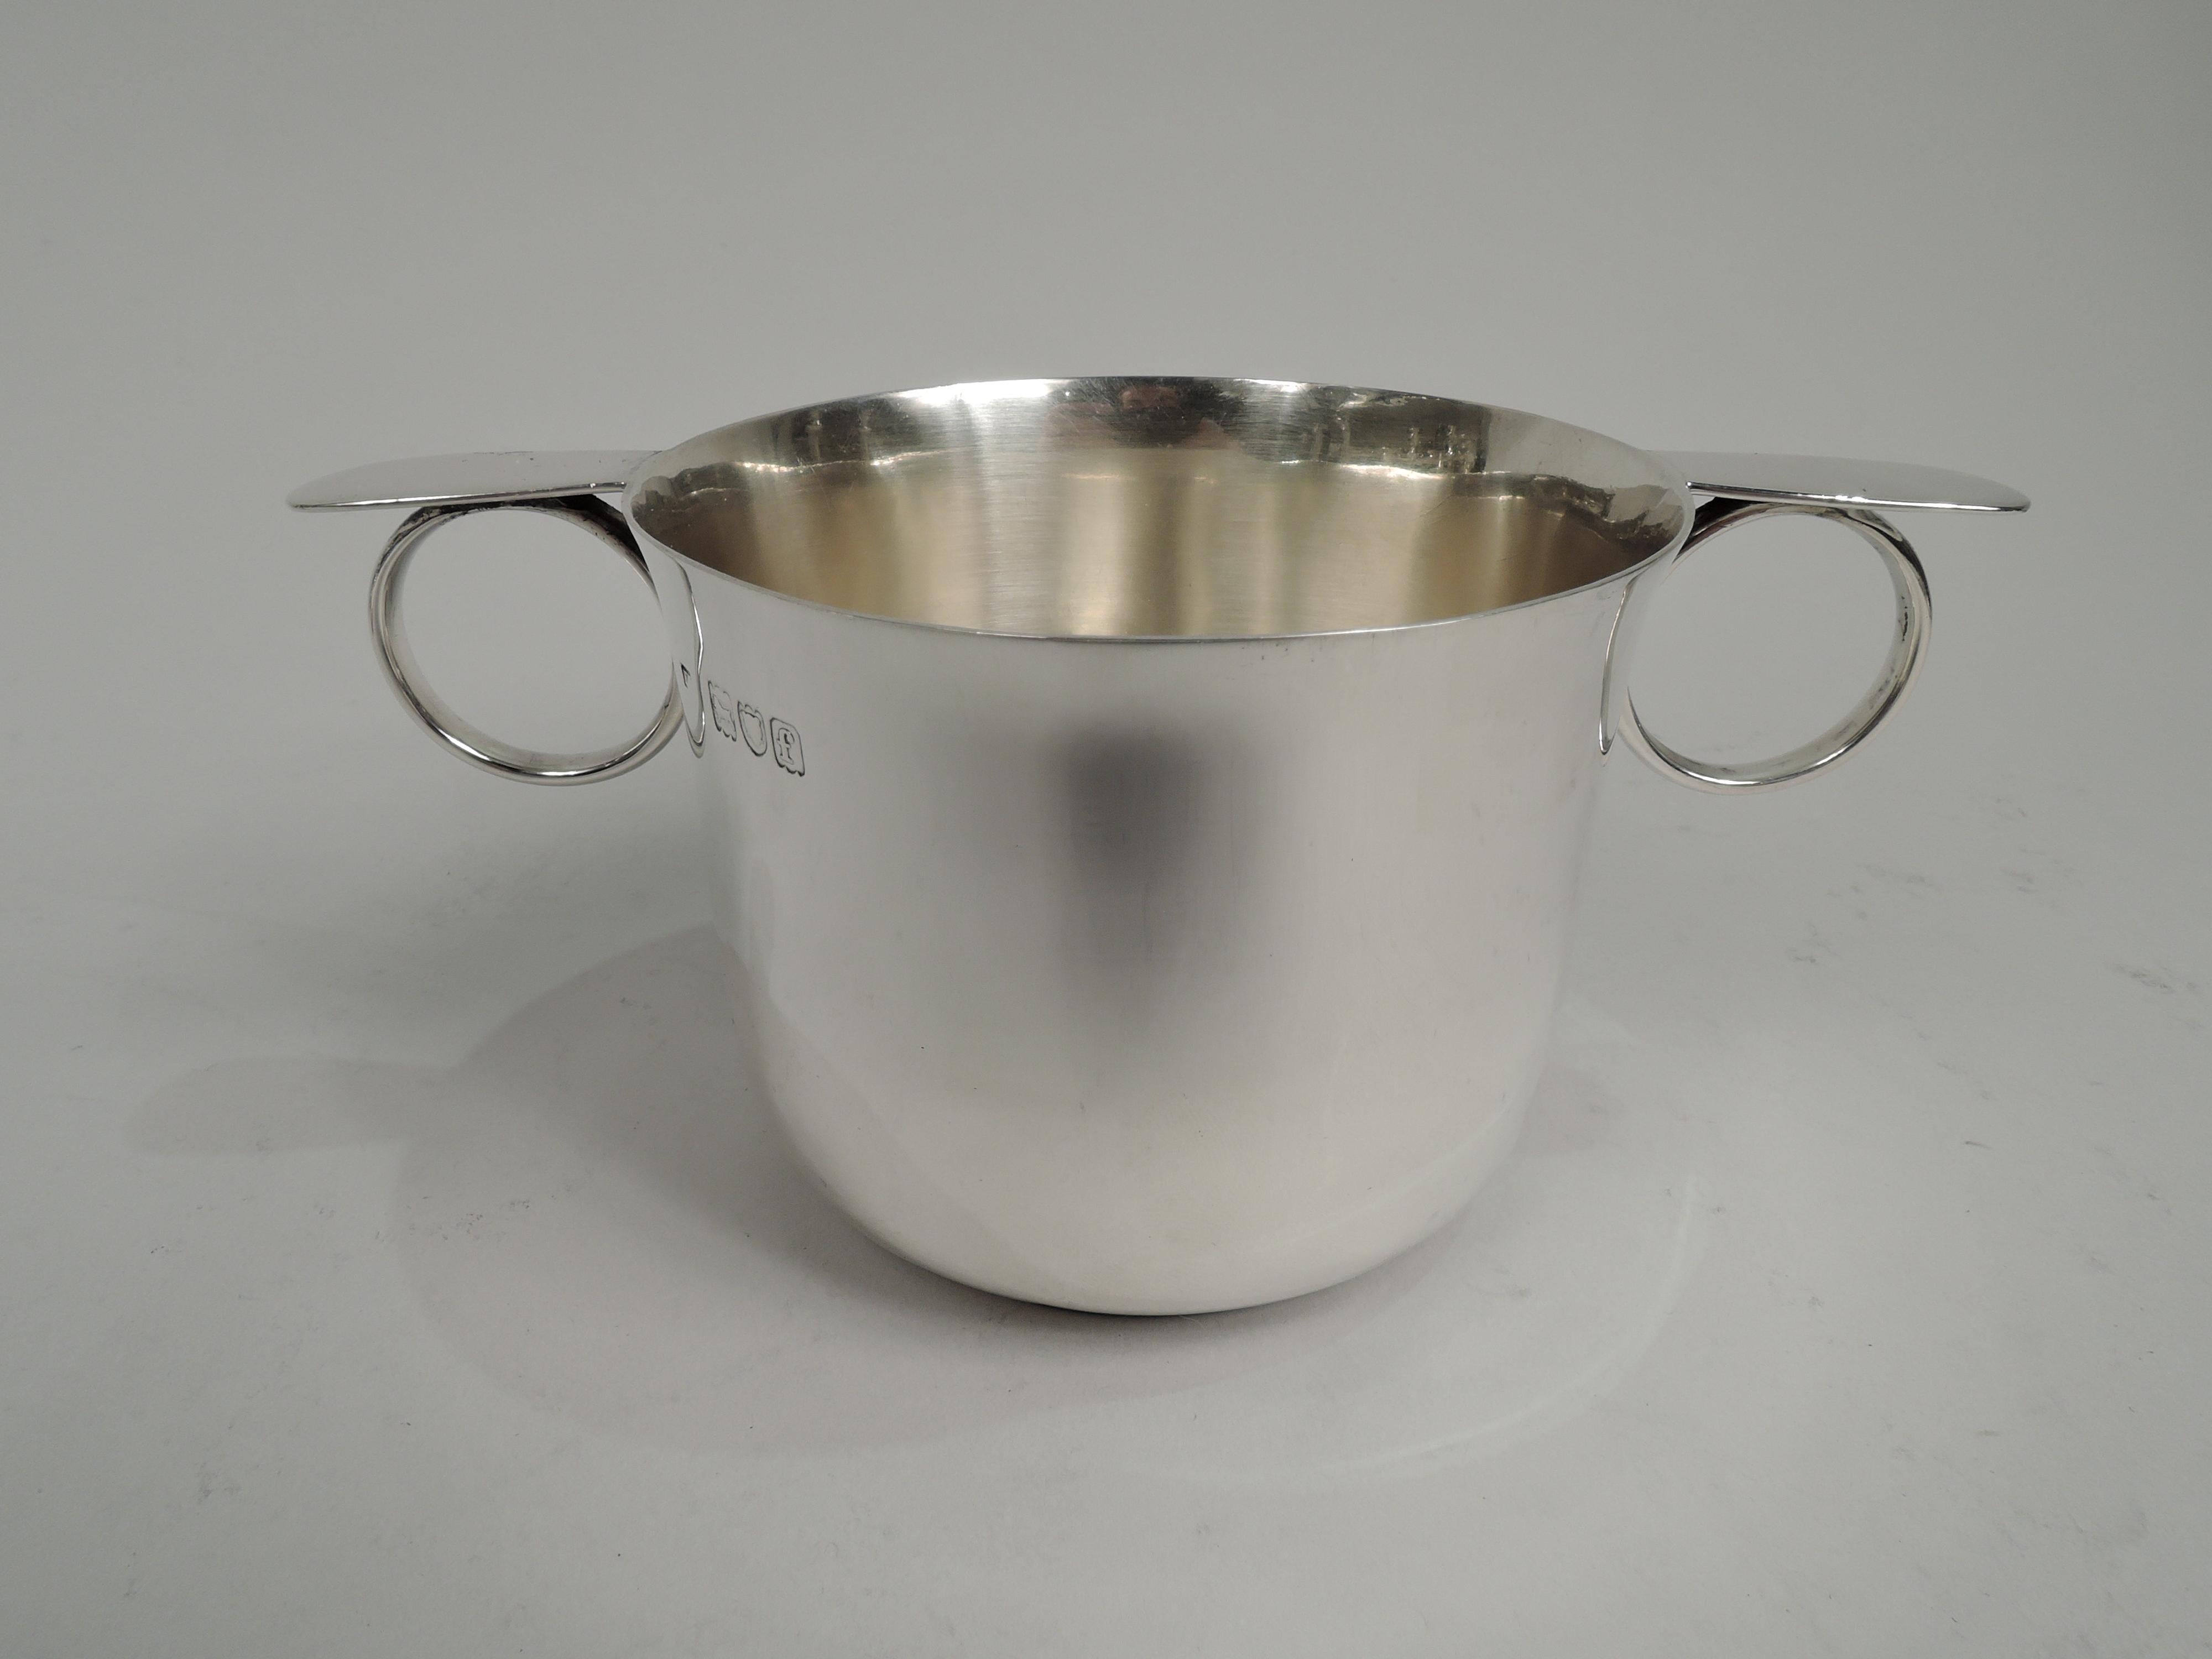 Edwardian sterling silver cup. Made by Henry Frazer in London in 1901.Round bowl with gently flared rim, curved bottom, and inset foot. Ring handles with flat and tapering caps. Fully marked including retailer’s stamp (“Rowlands & Frazer / 146